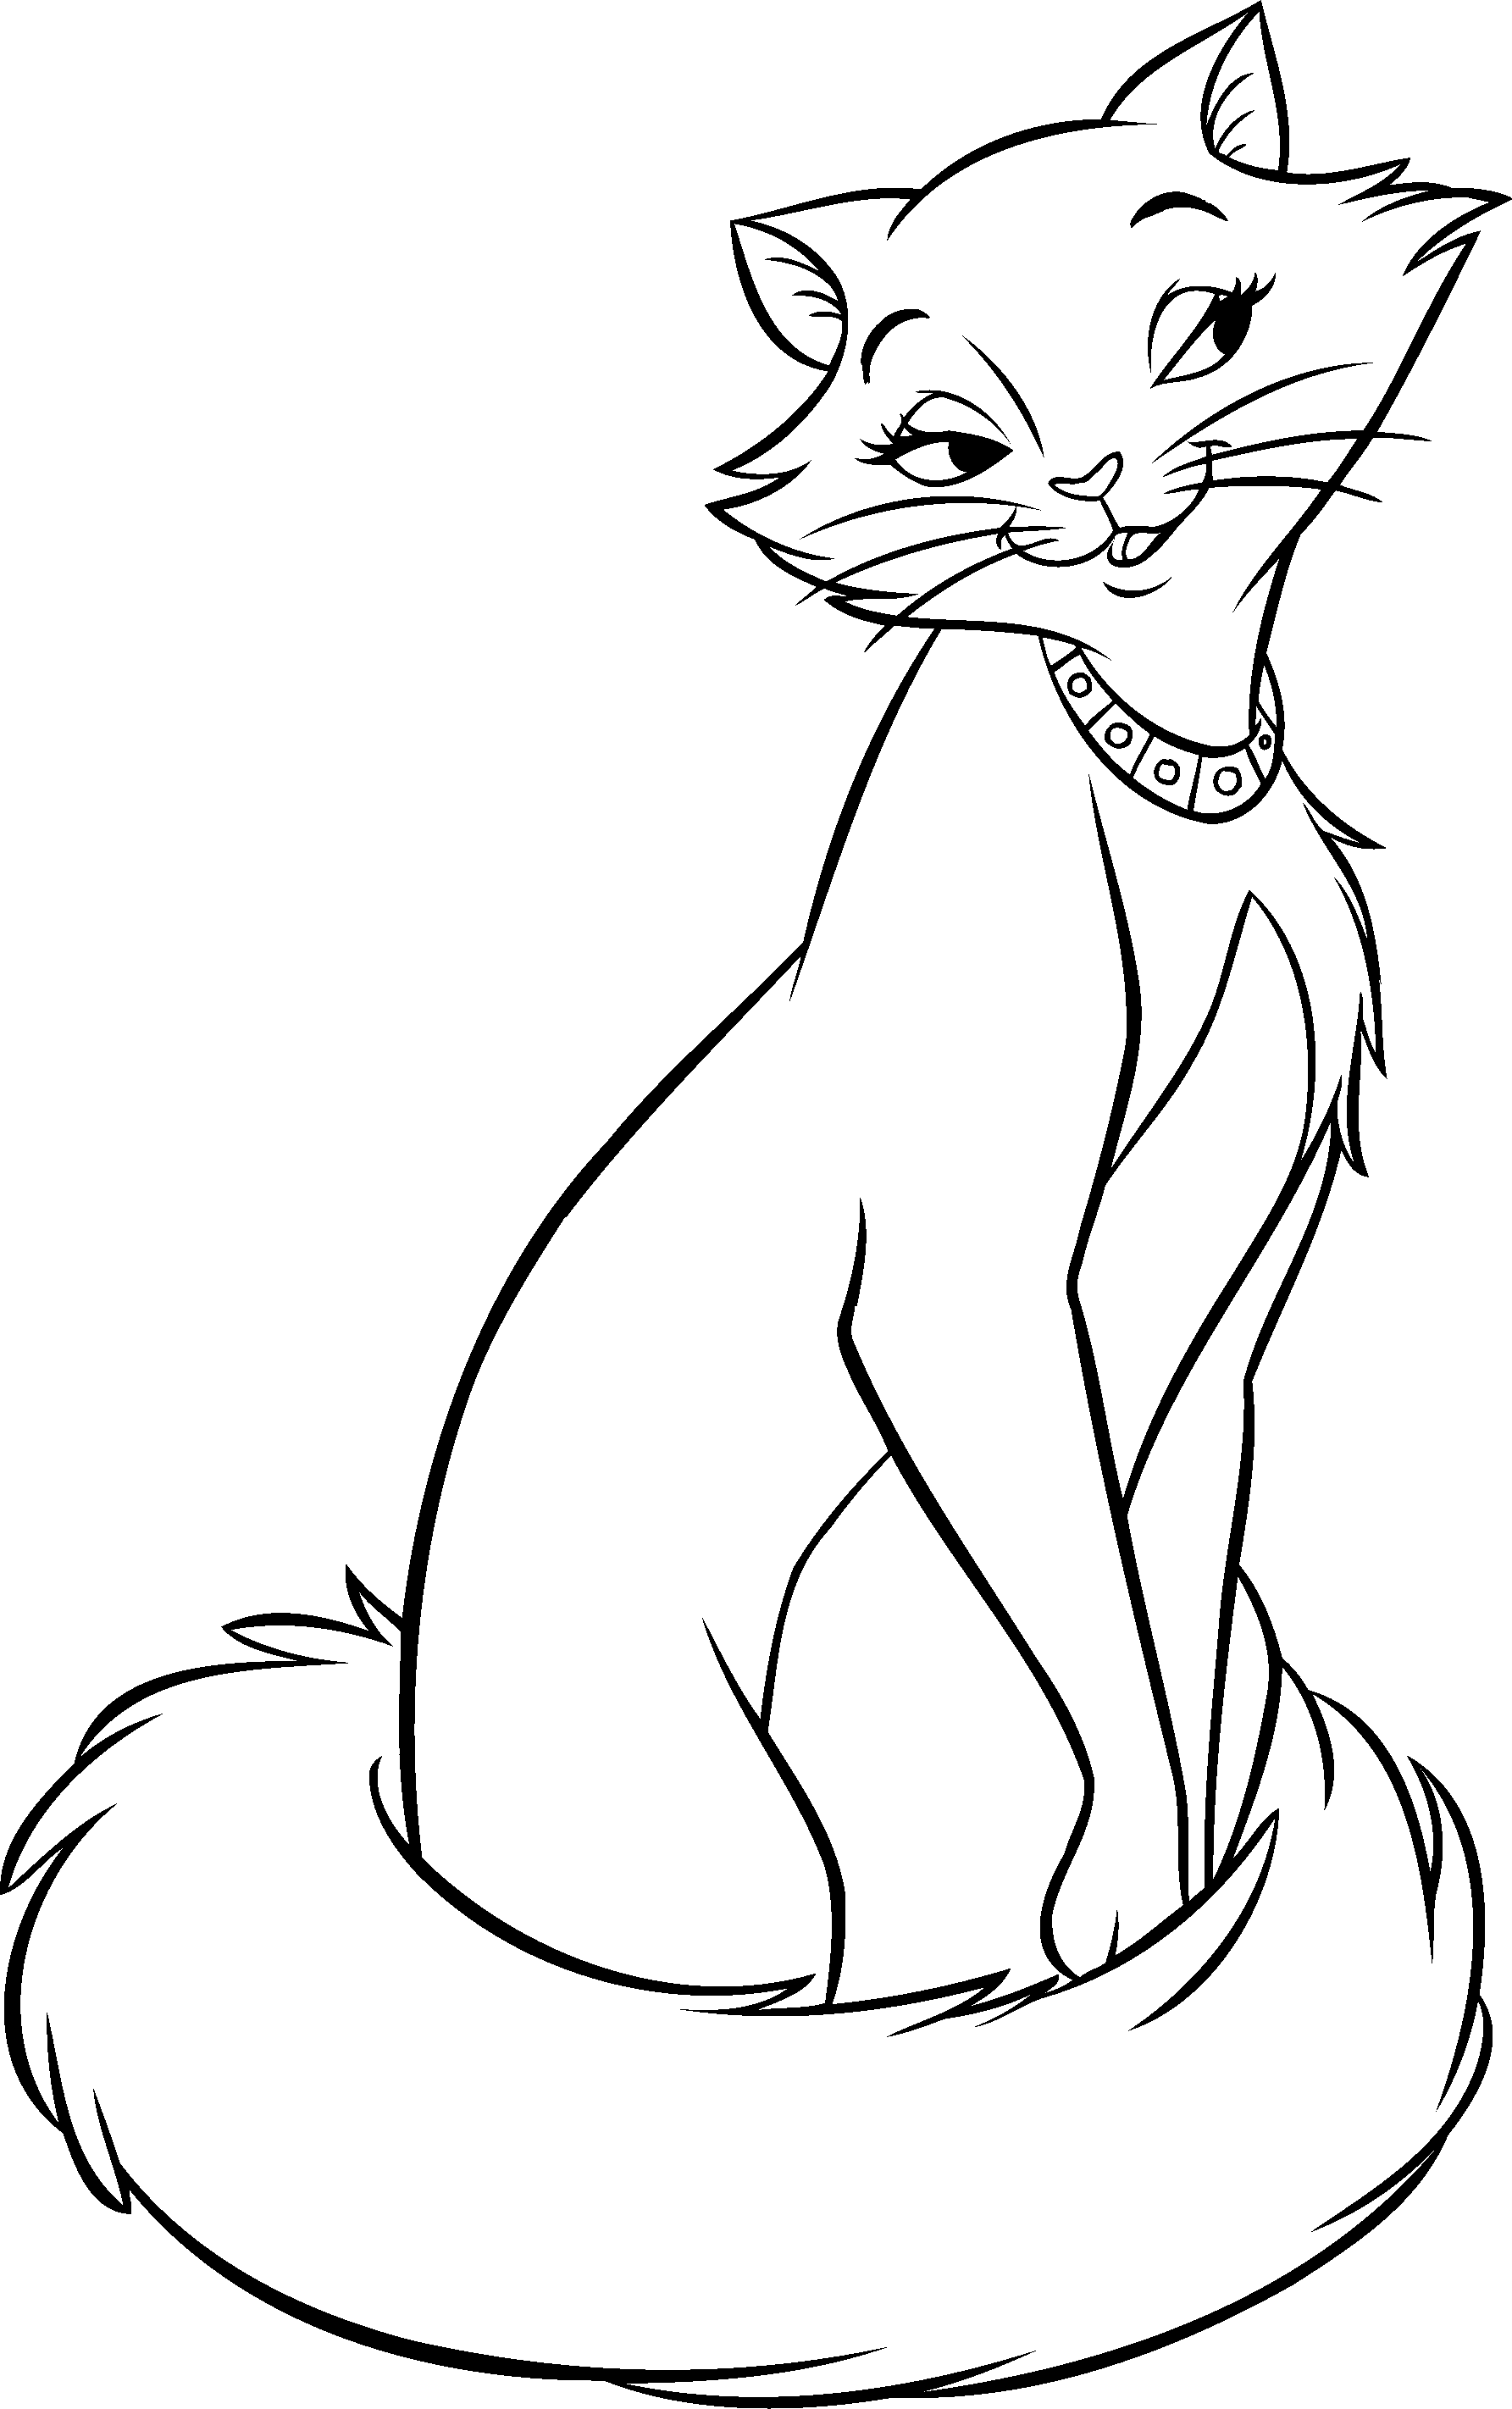 Aristocats Coloring Page